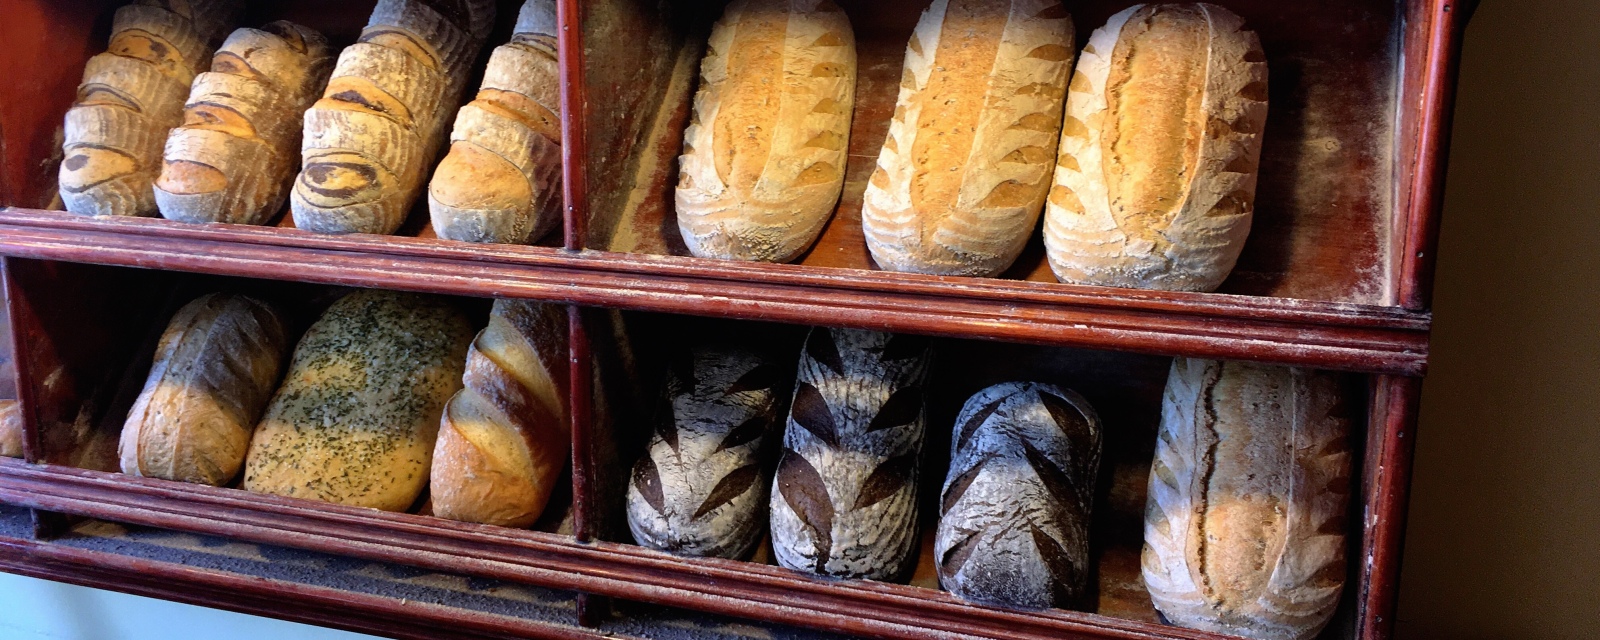 close up picture of fresh loaves of bread on a bakery shelf